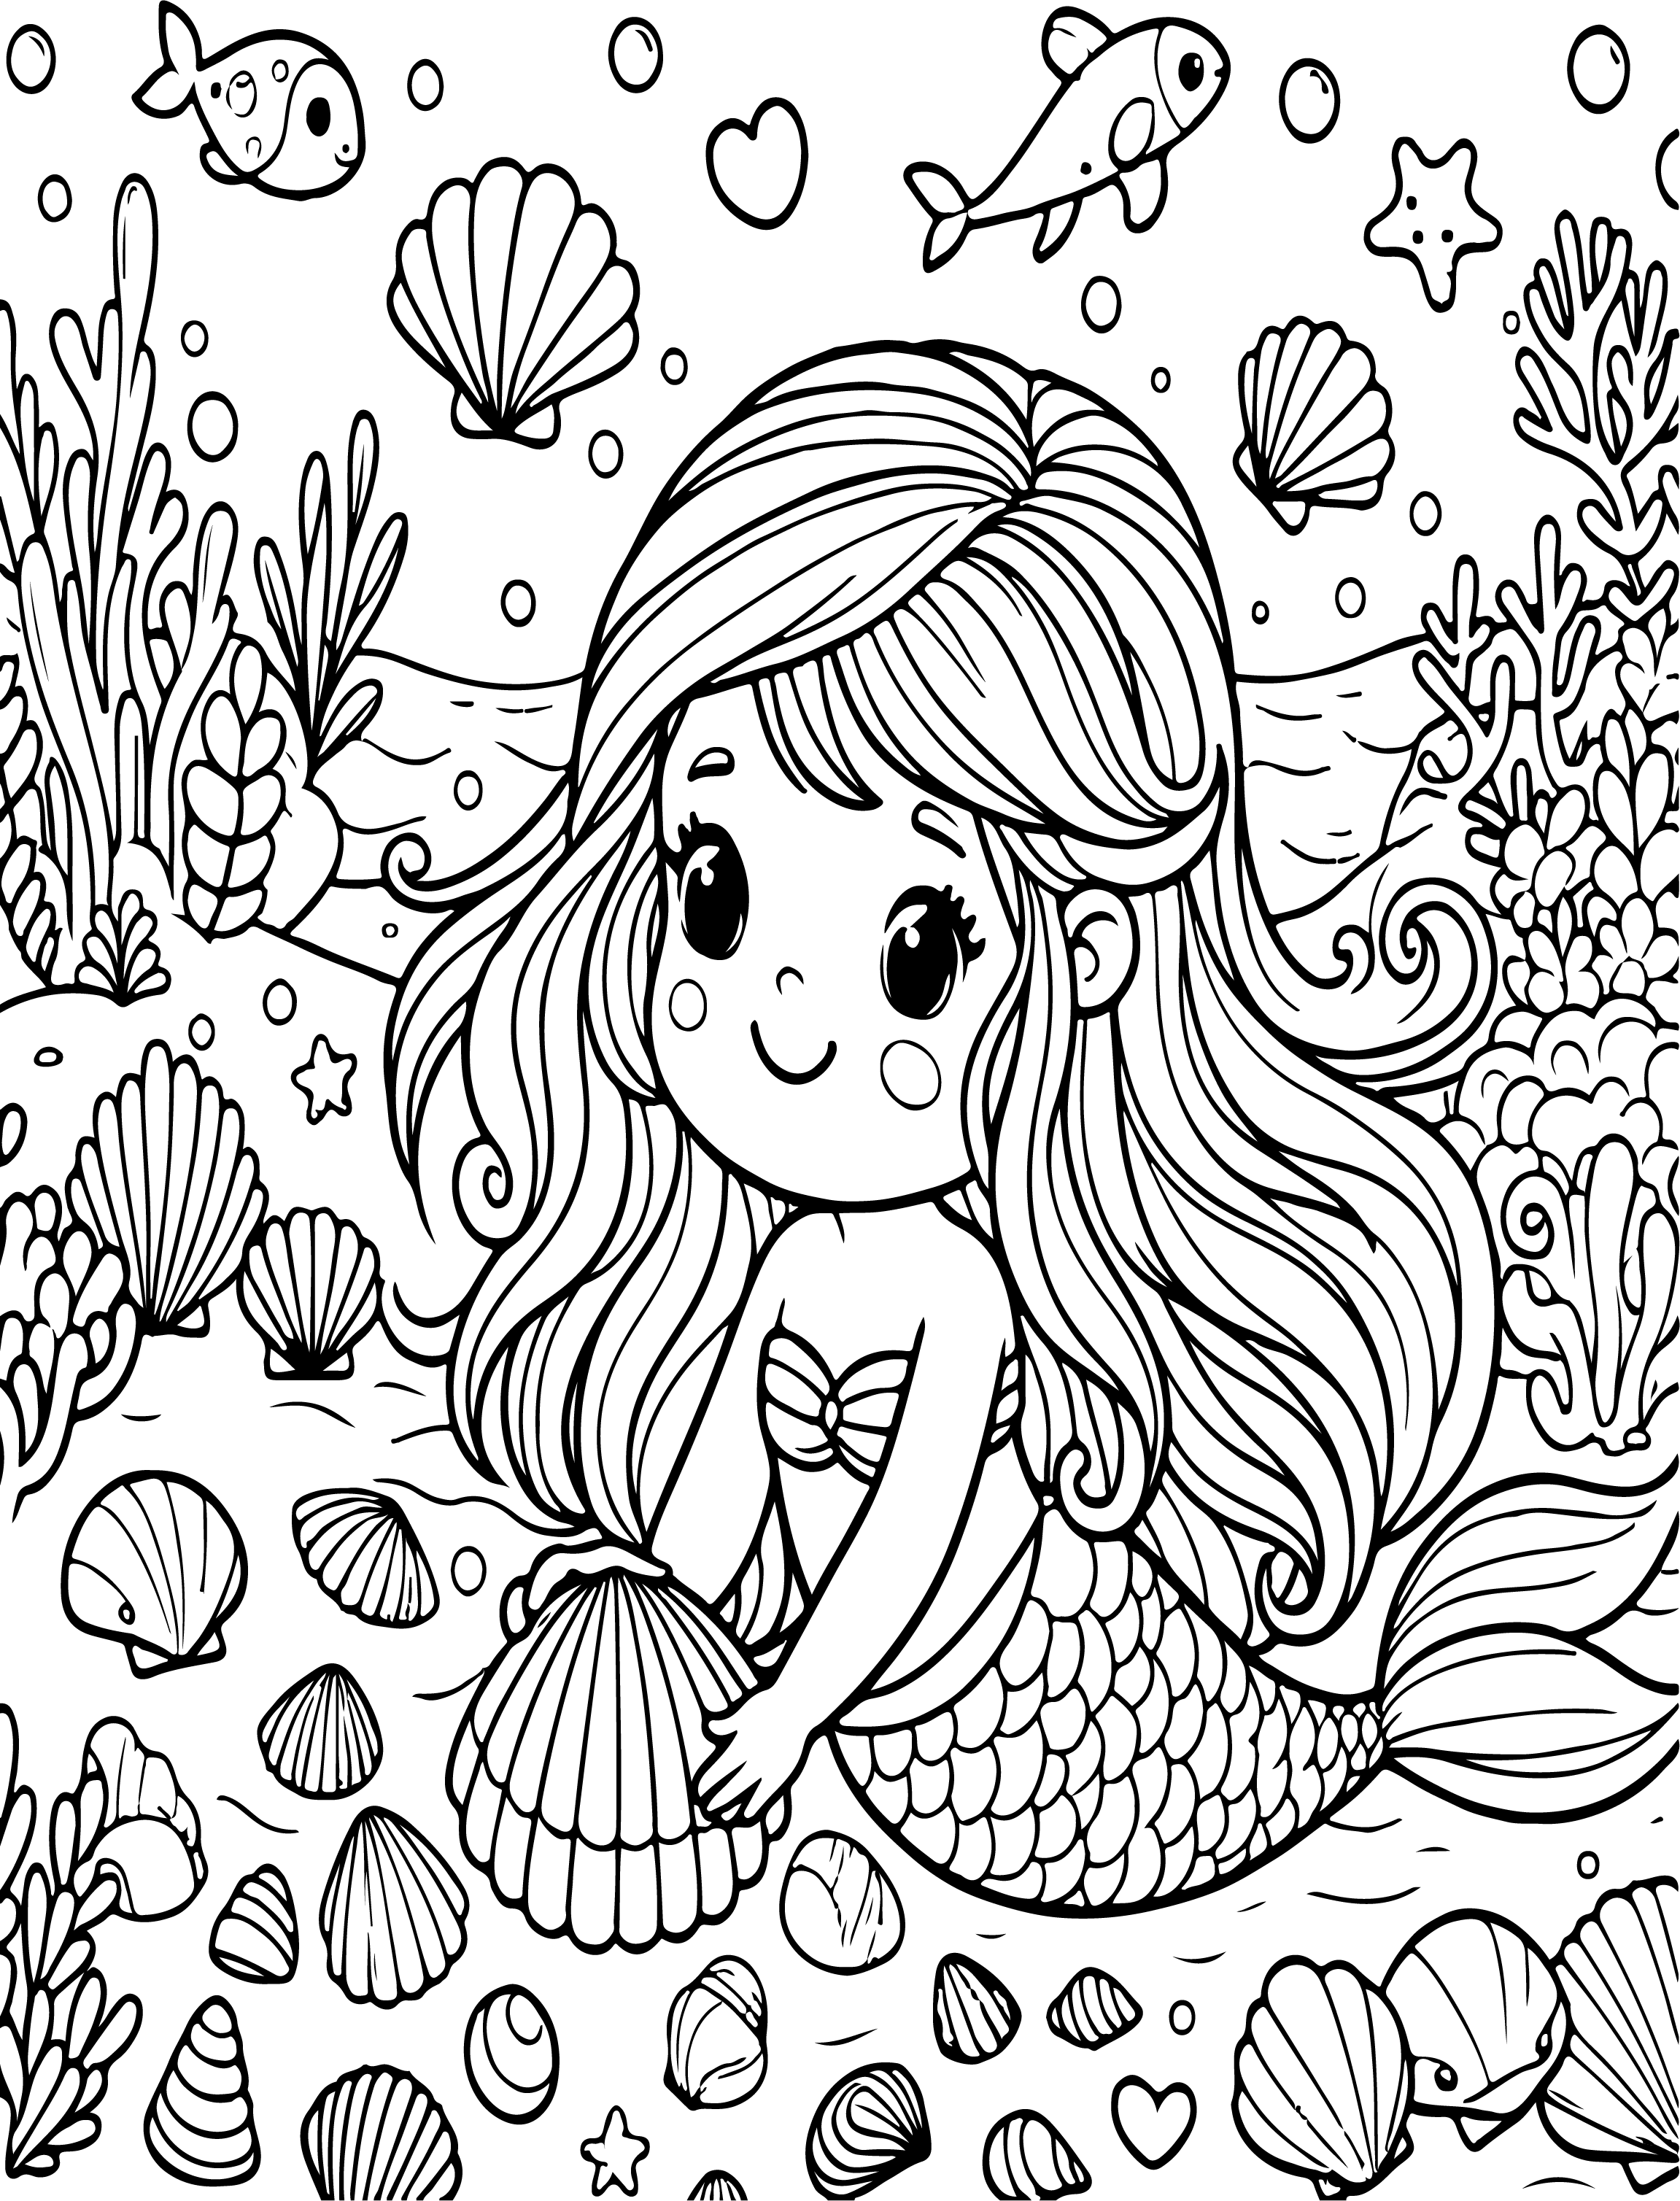 Free Printable Little Mermaid Coloring Page For Kids And Adults